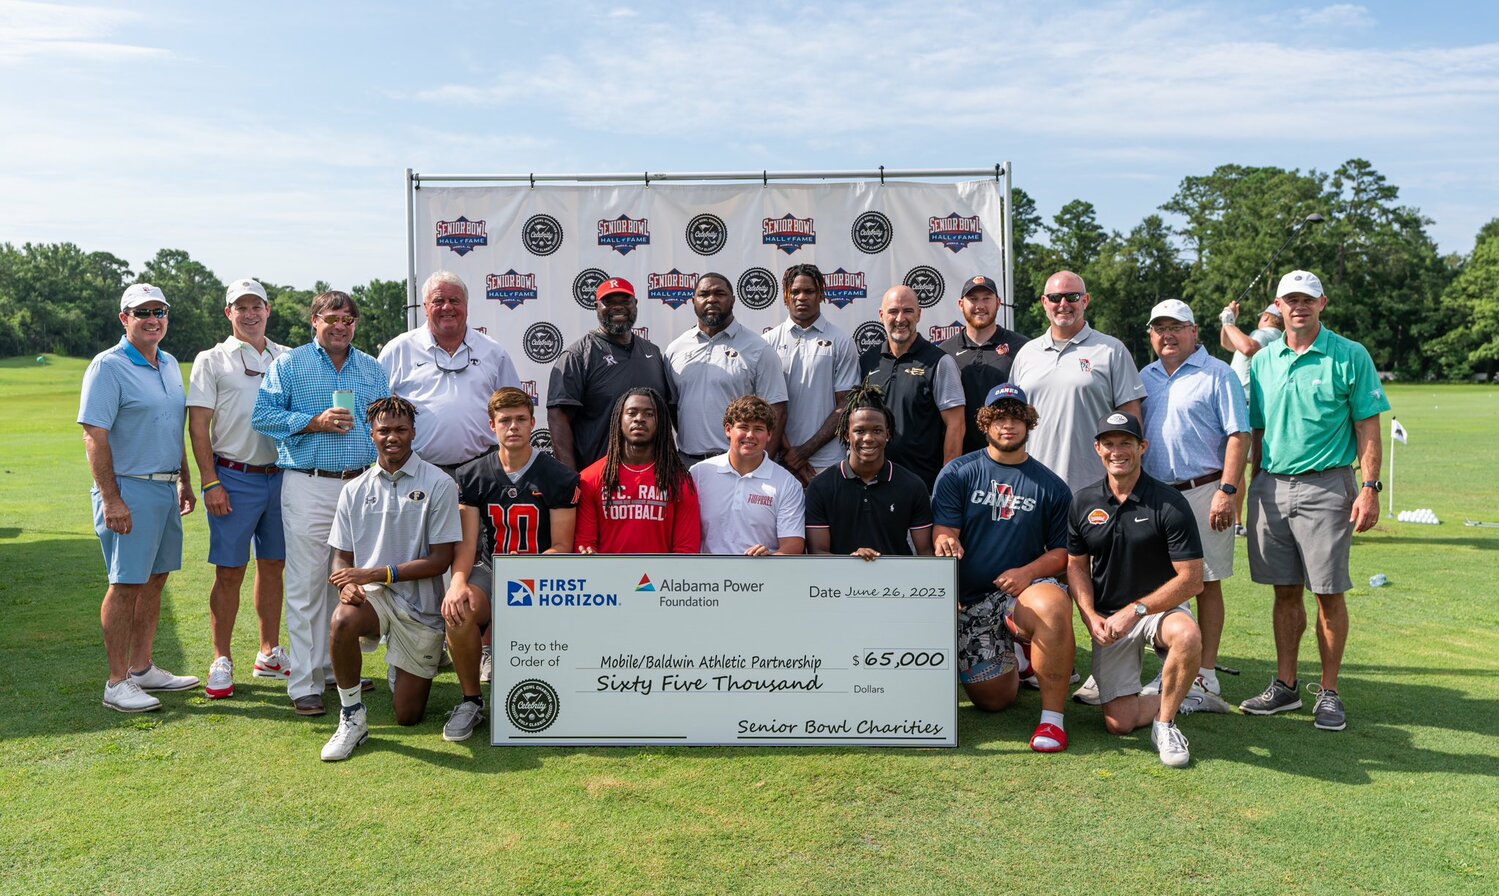 The third annual Senior Bowl Charities Celebrity Golf Classic was held on Monday, June 26, at Lakewood Golf Club where the proceeds benefitted the Mobile/Baldwin Athletic Partnership and 13 local public high school programs received $5,000.